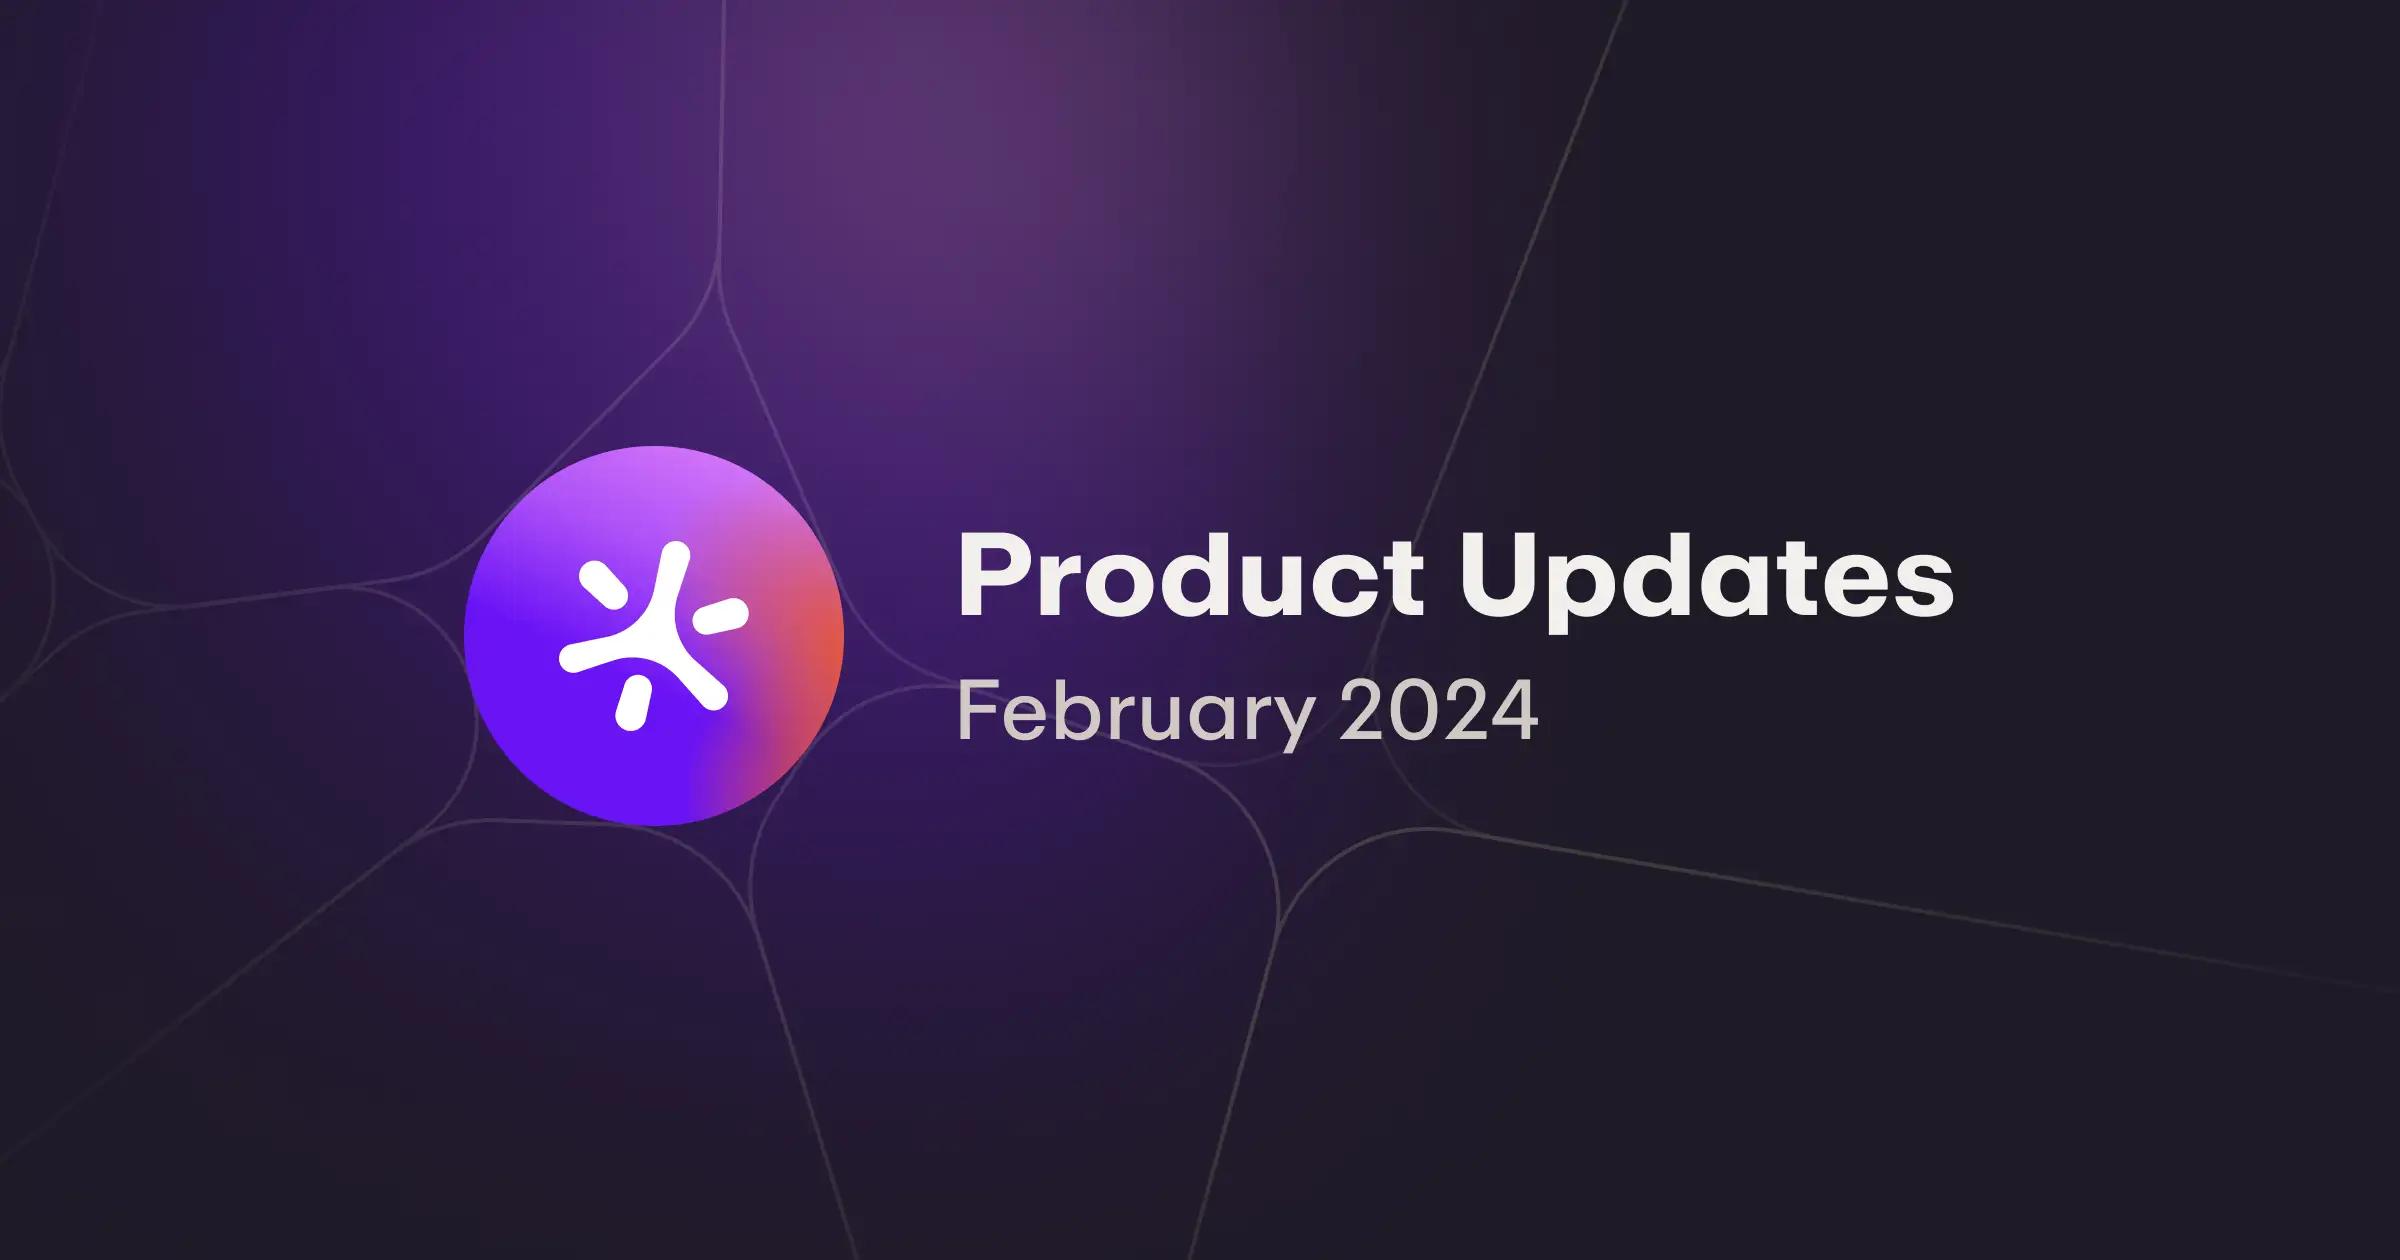 February '24 Product Update